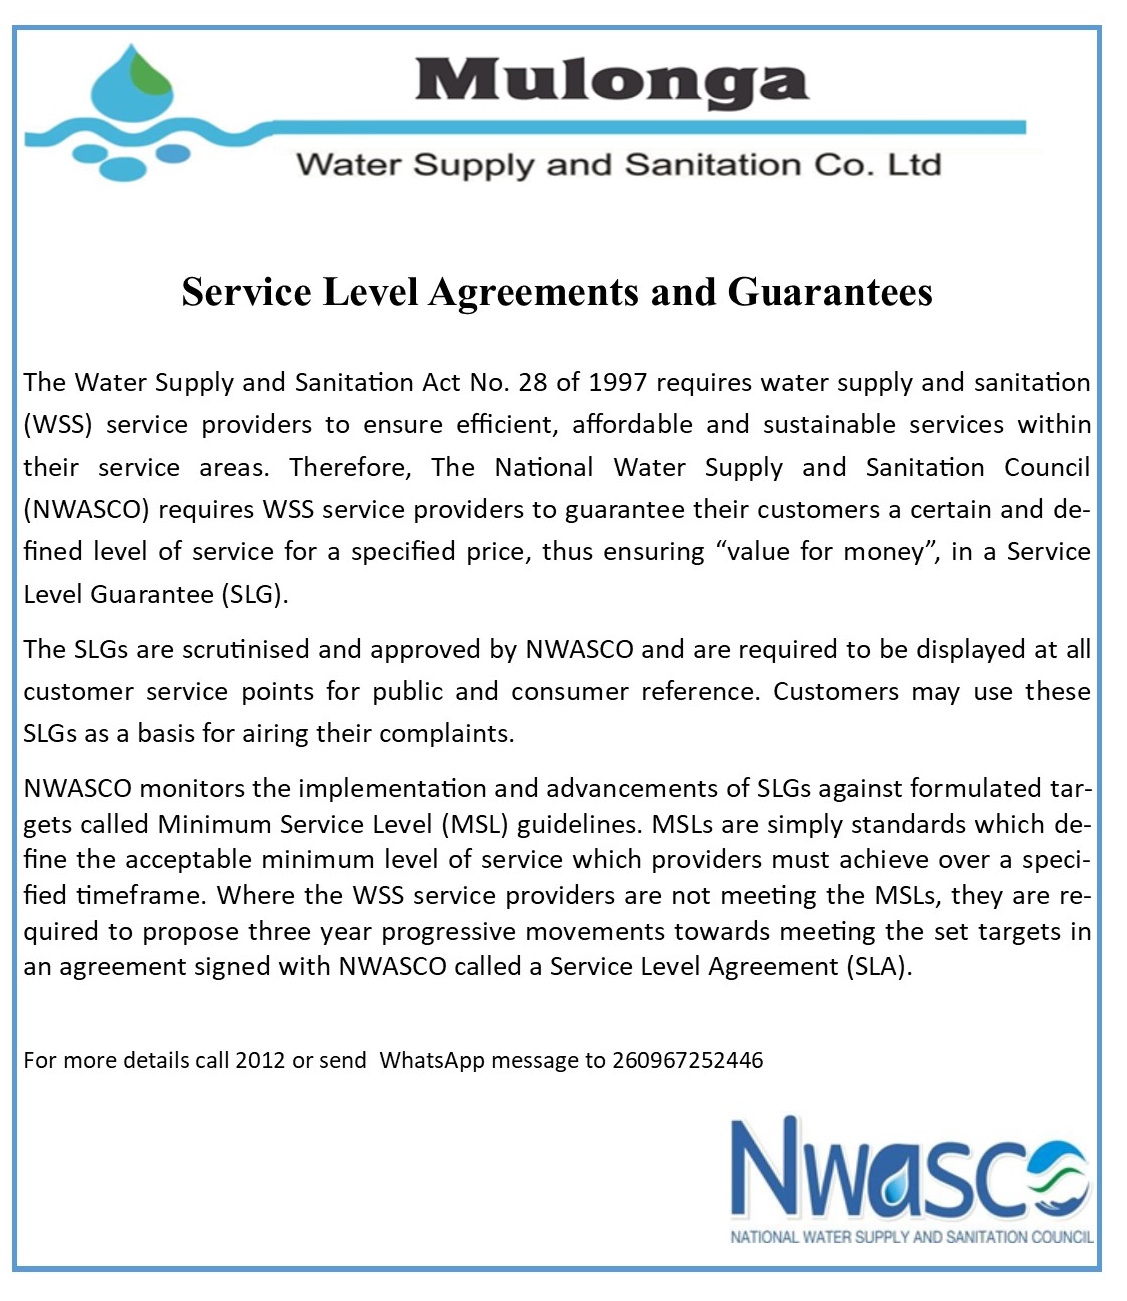 Service Level Agreements and Guarantees